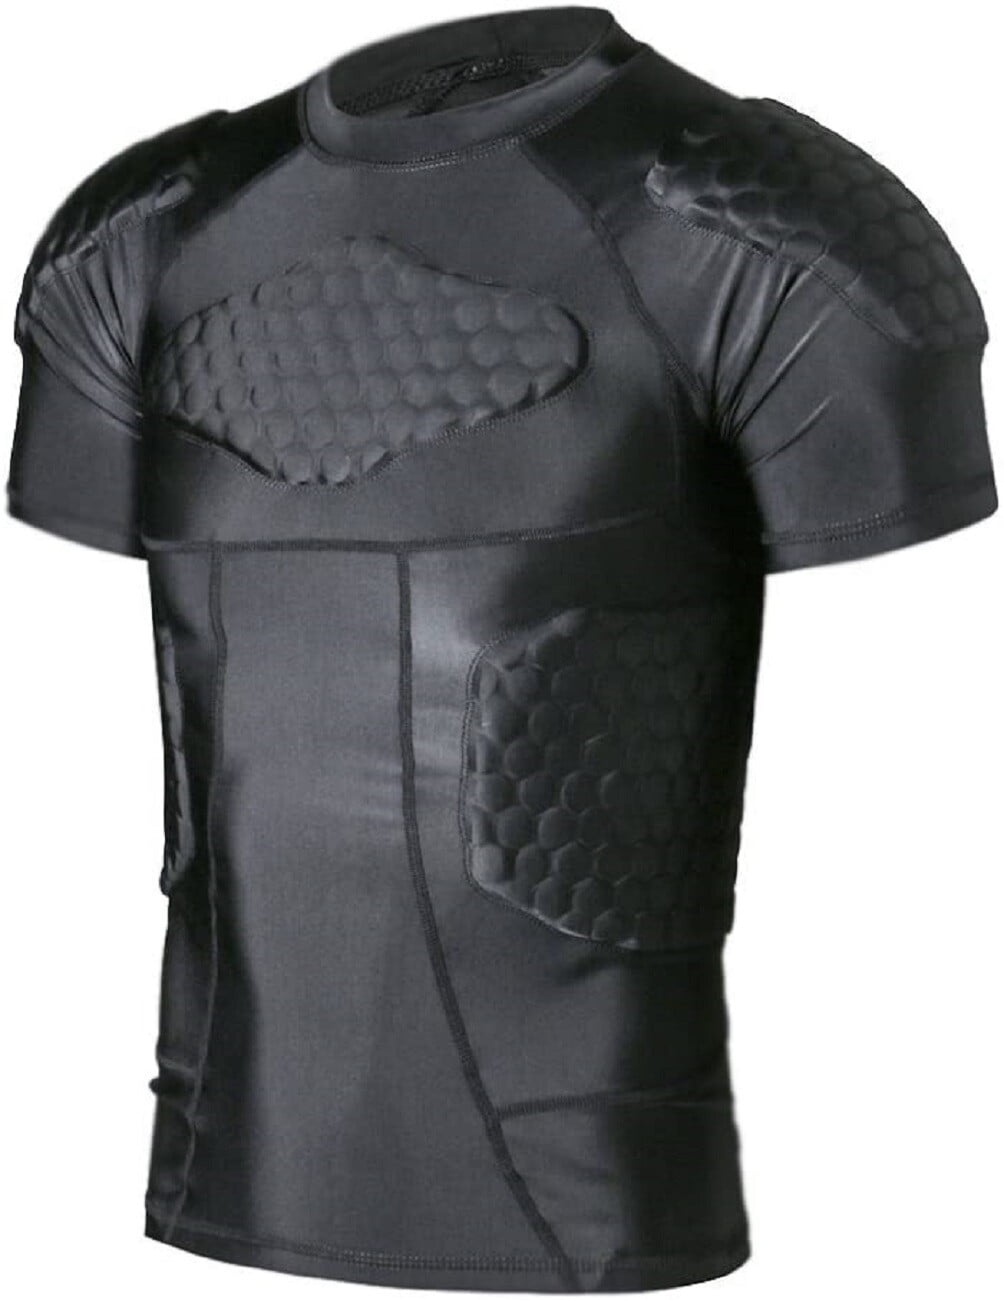 TUOY Men's Padded Compression Shirt Protective Shirt Rib Chest Protector